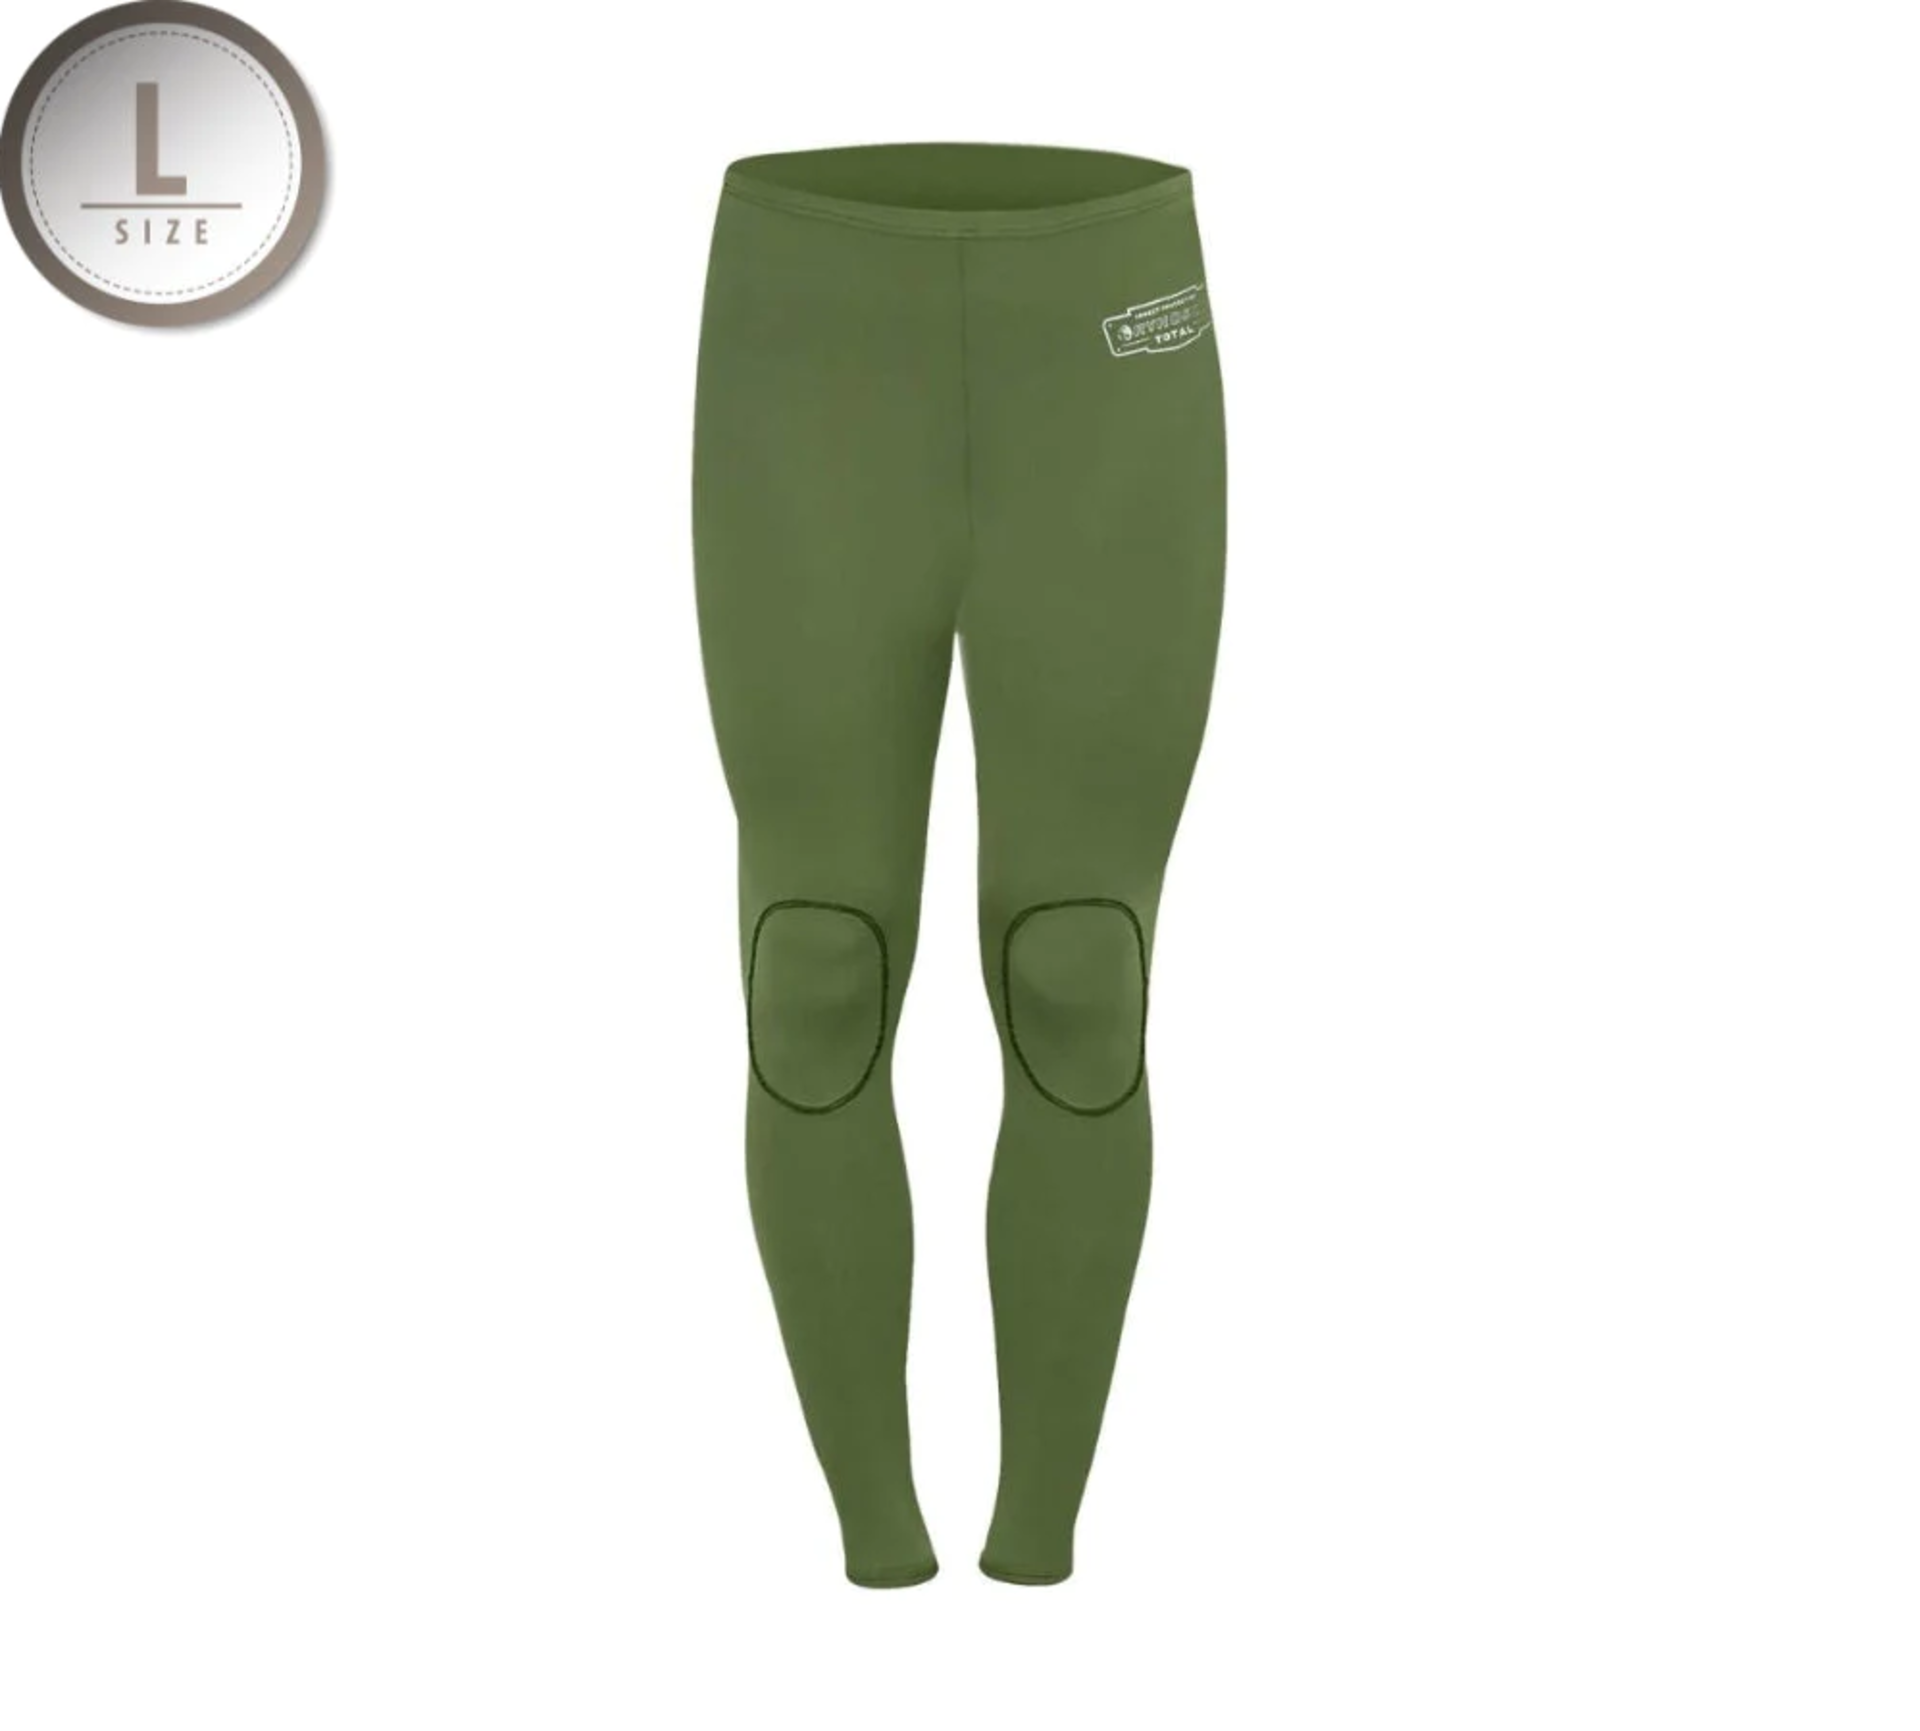 Rynoskin Hunting and Outdoor Pants - Green